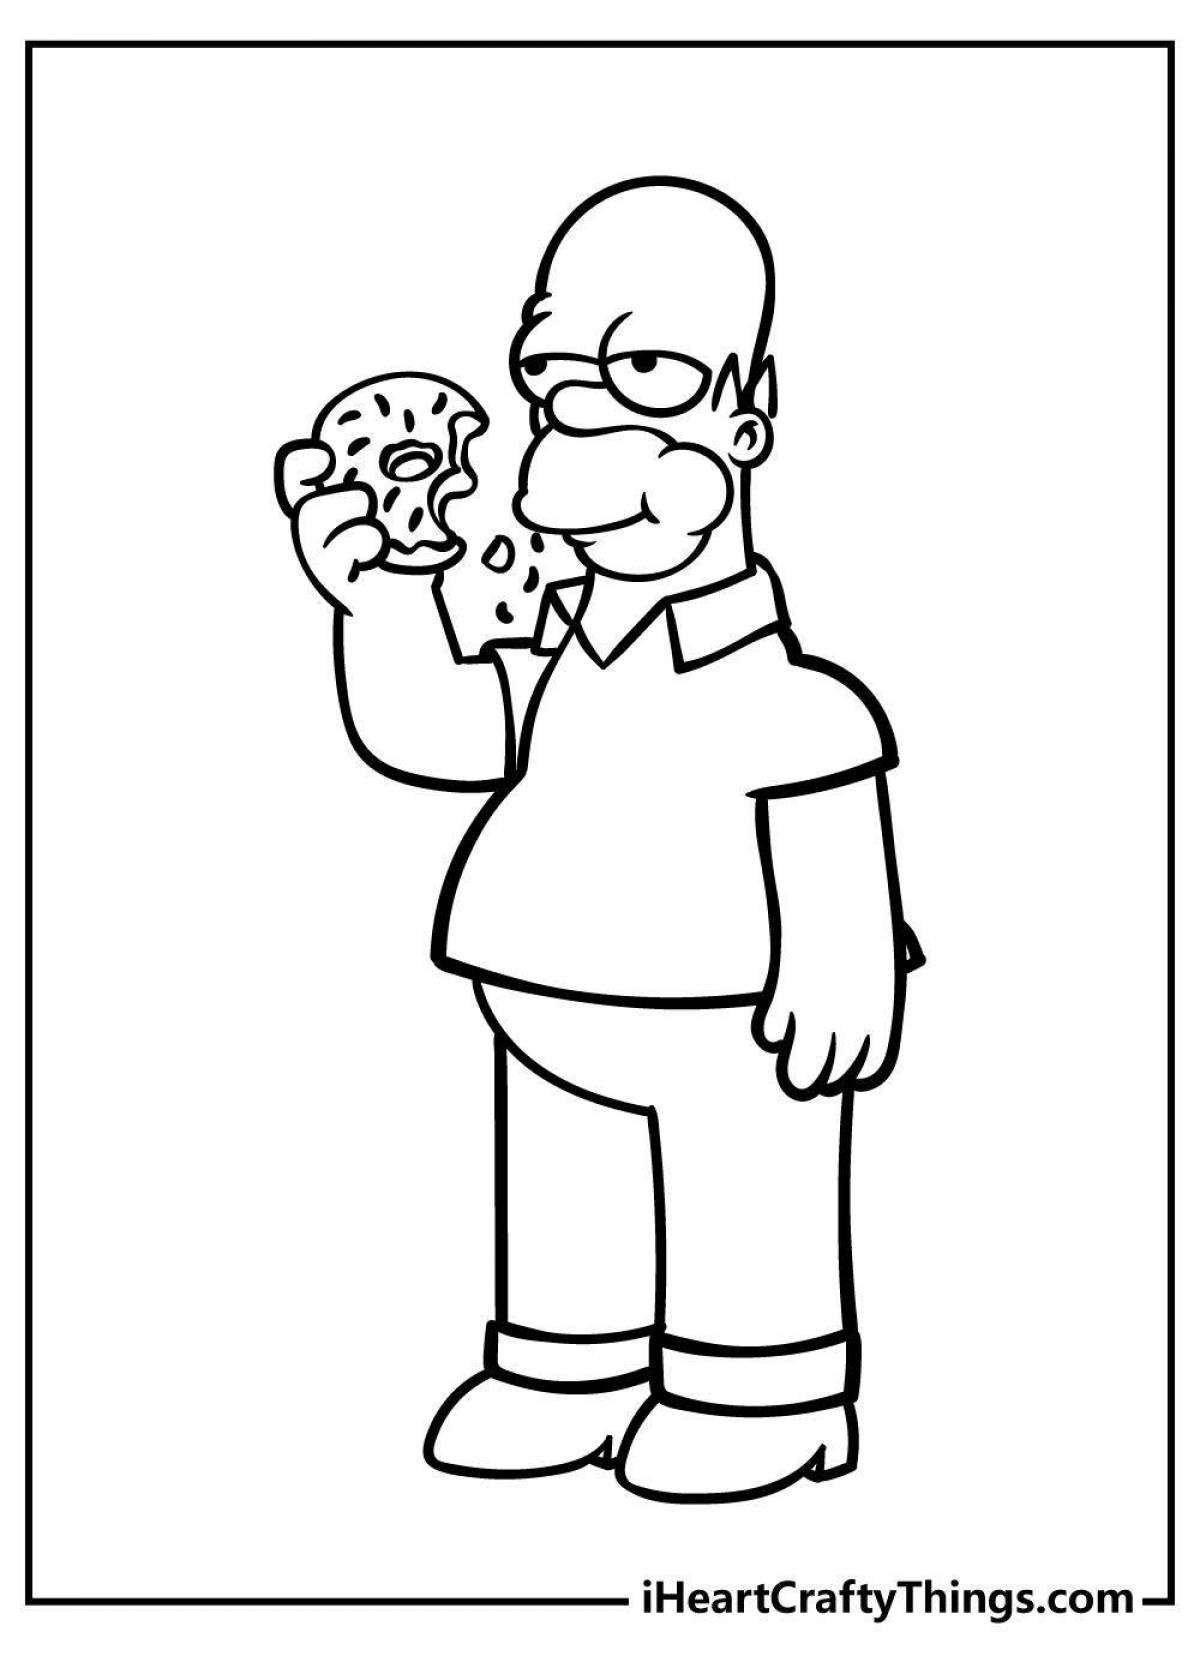 Homer simpson bright coloring